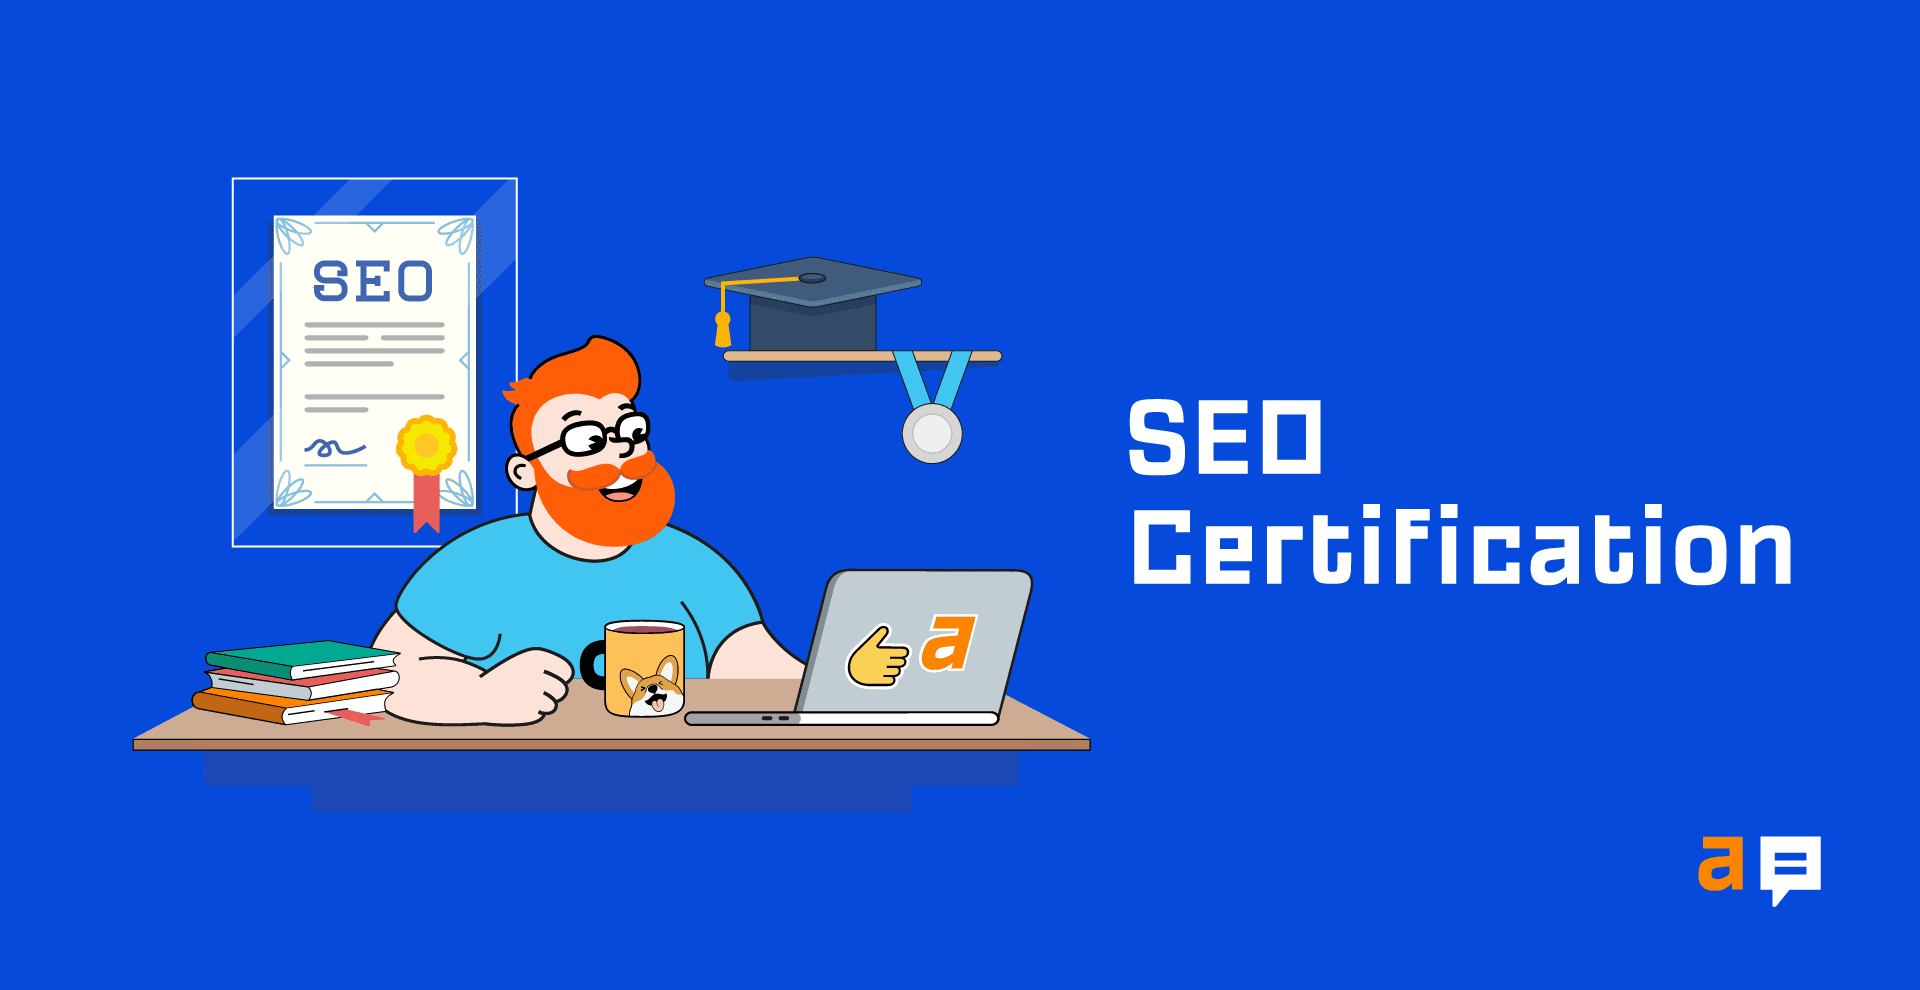 The unreliability of SEO certifications